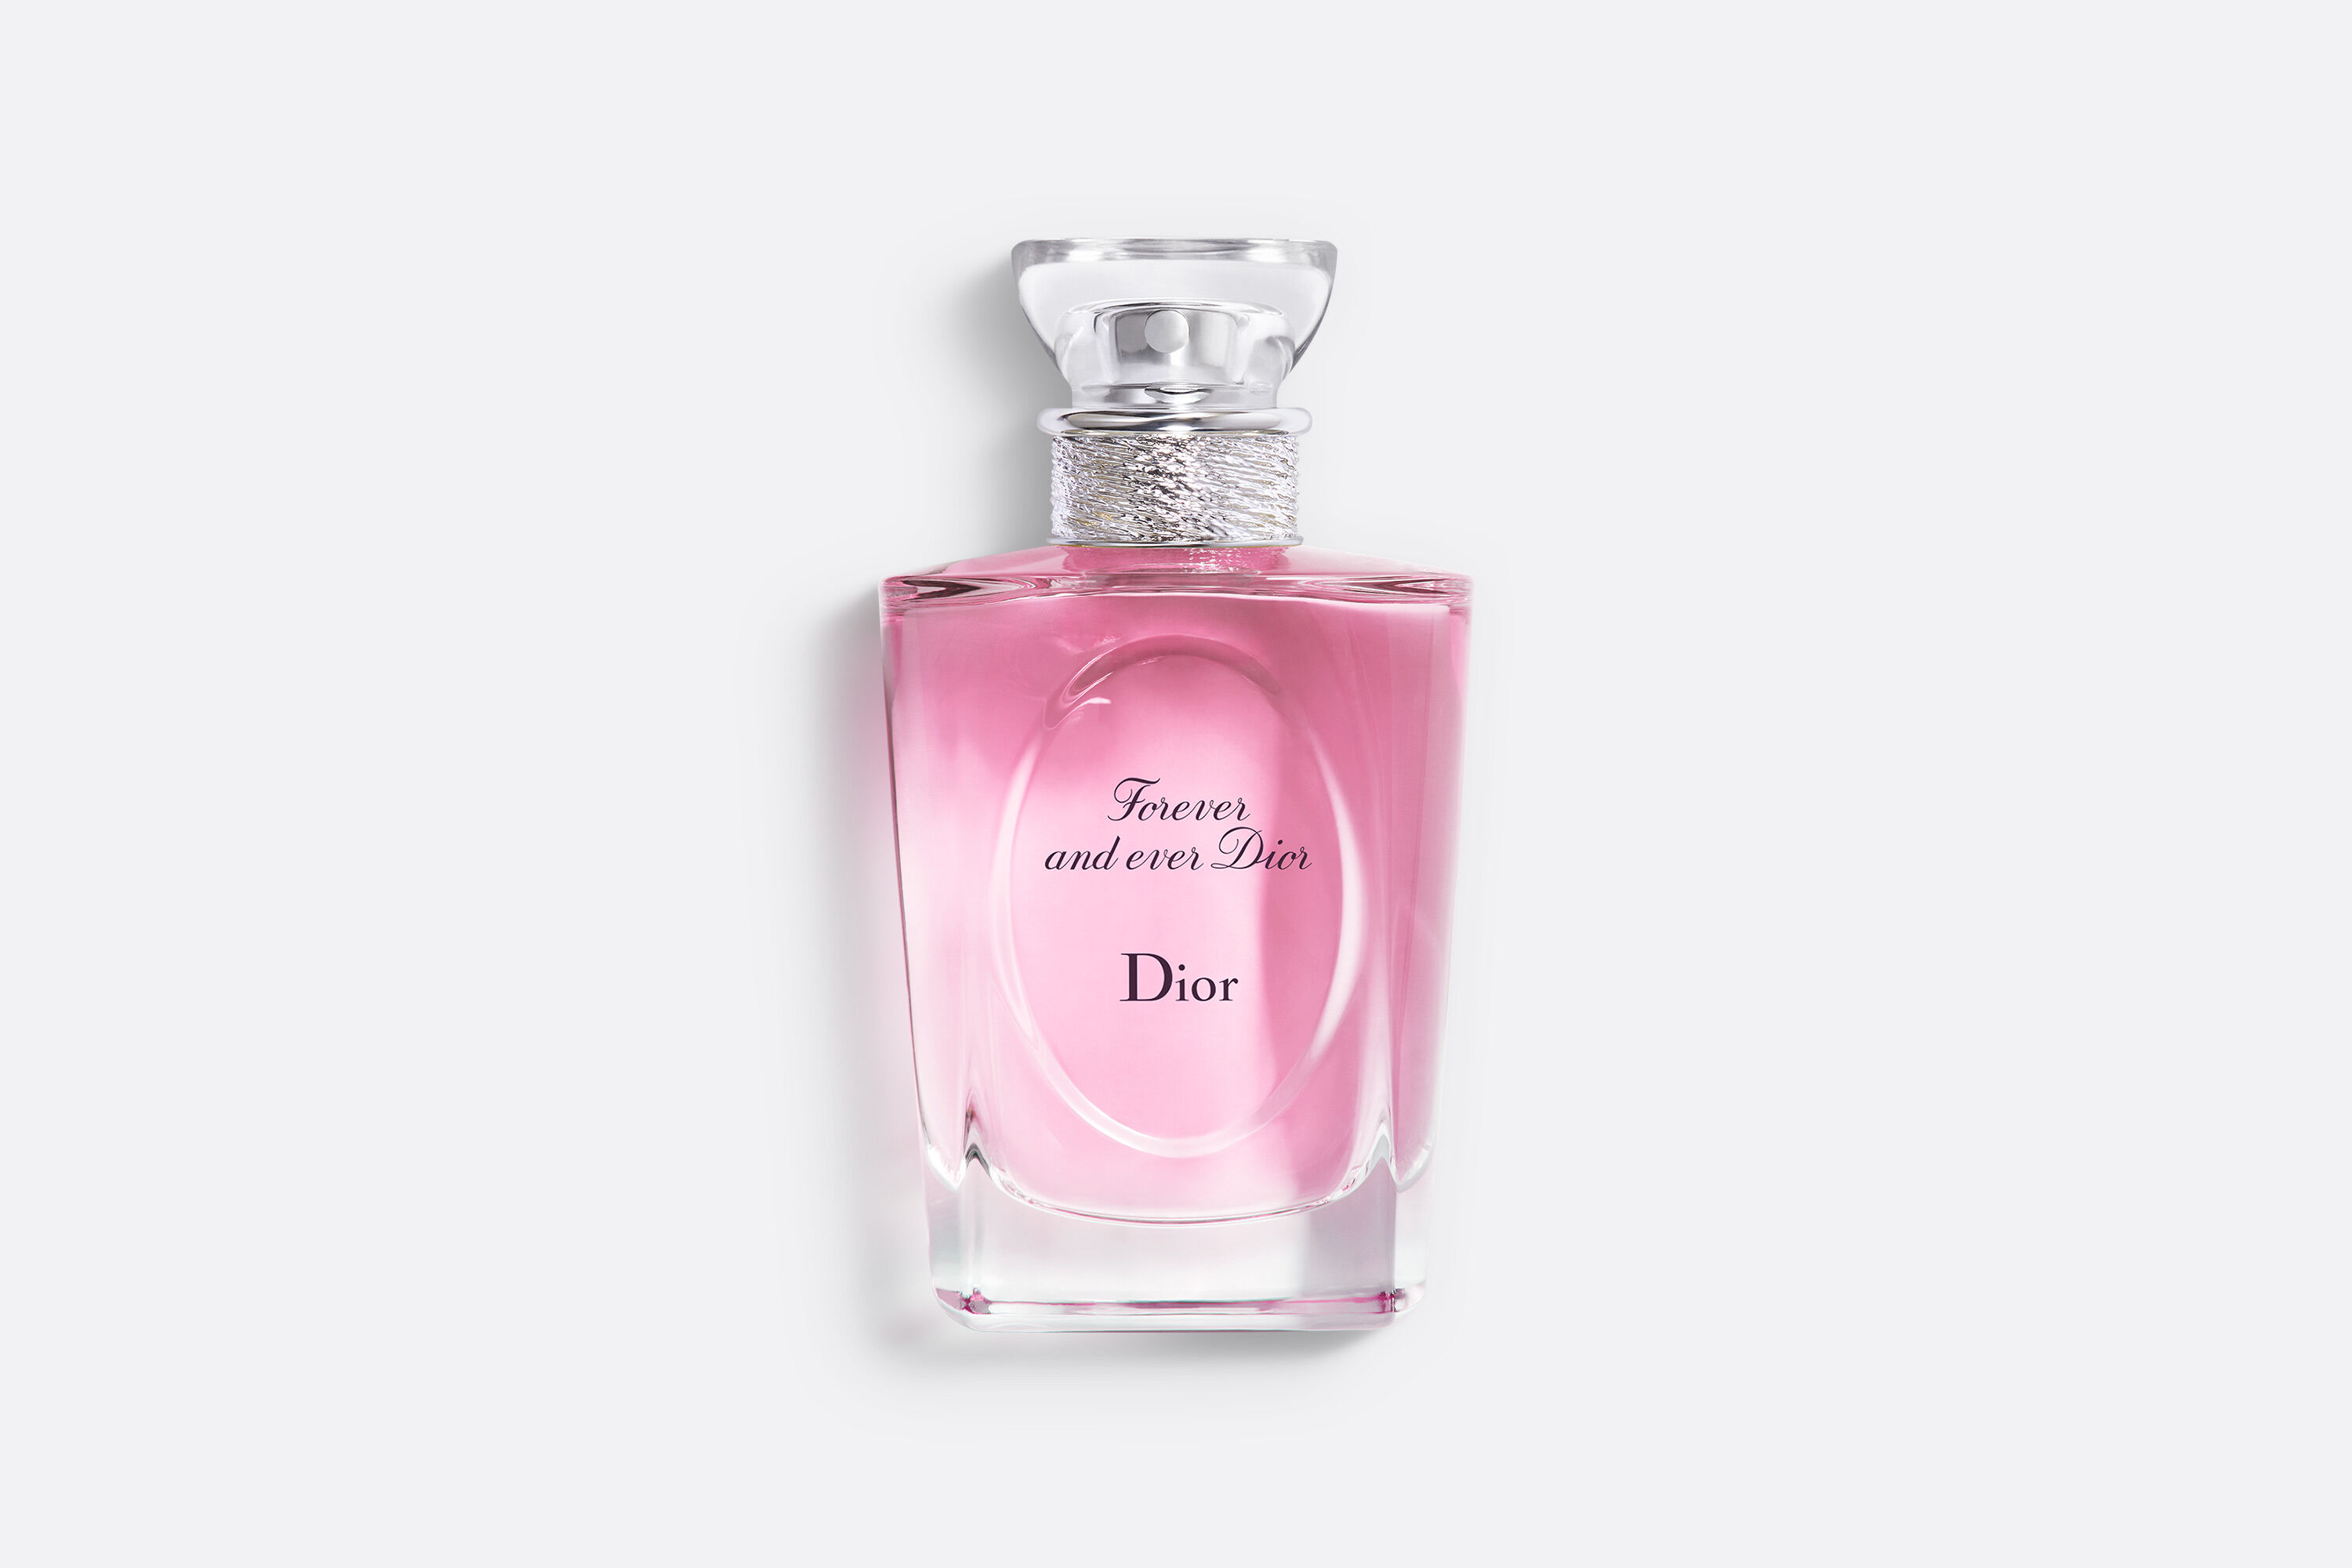 Zoom view - Image 1 - Dior - Forever And Ever Dior Eau de toilette